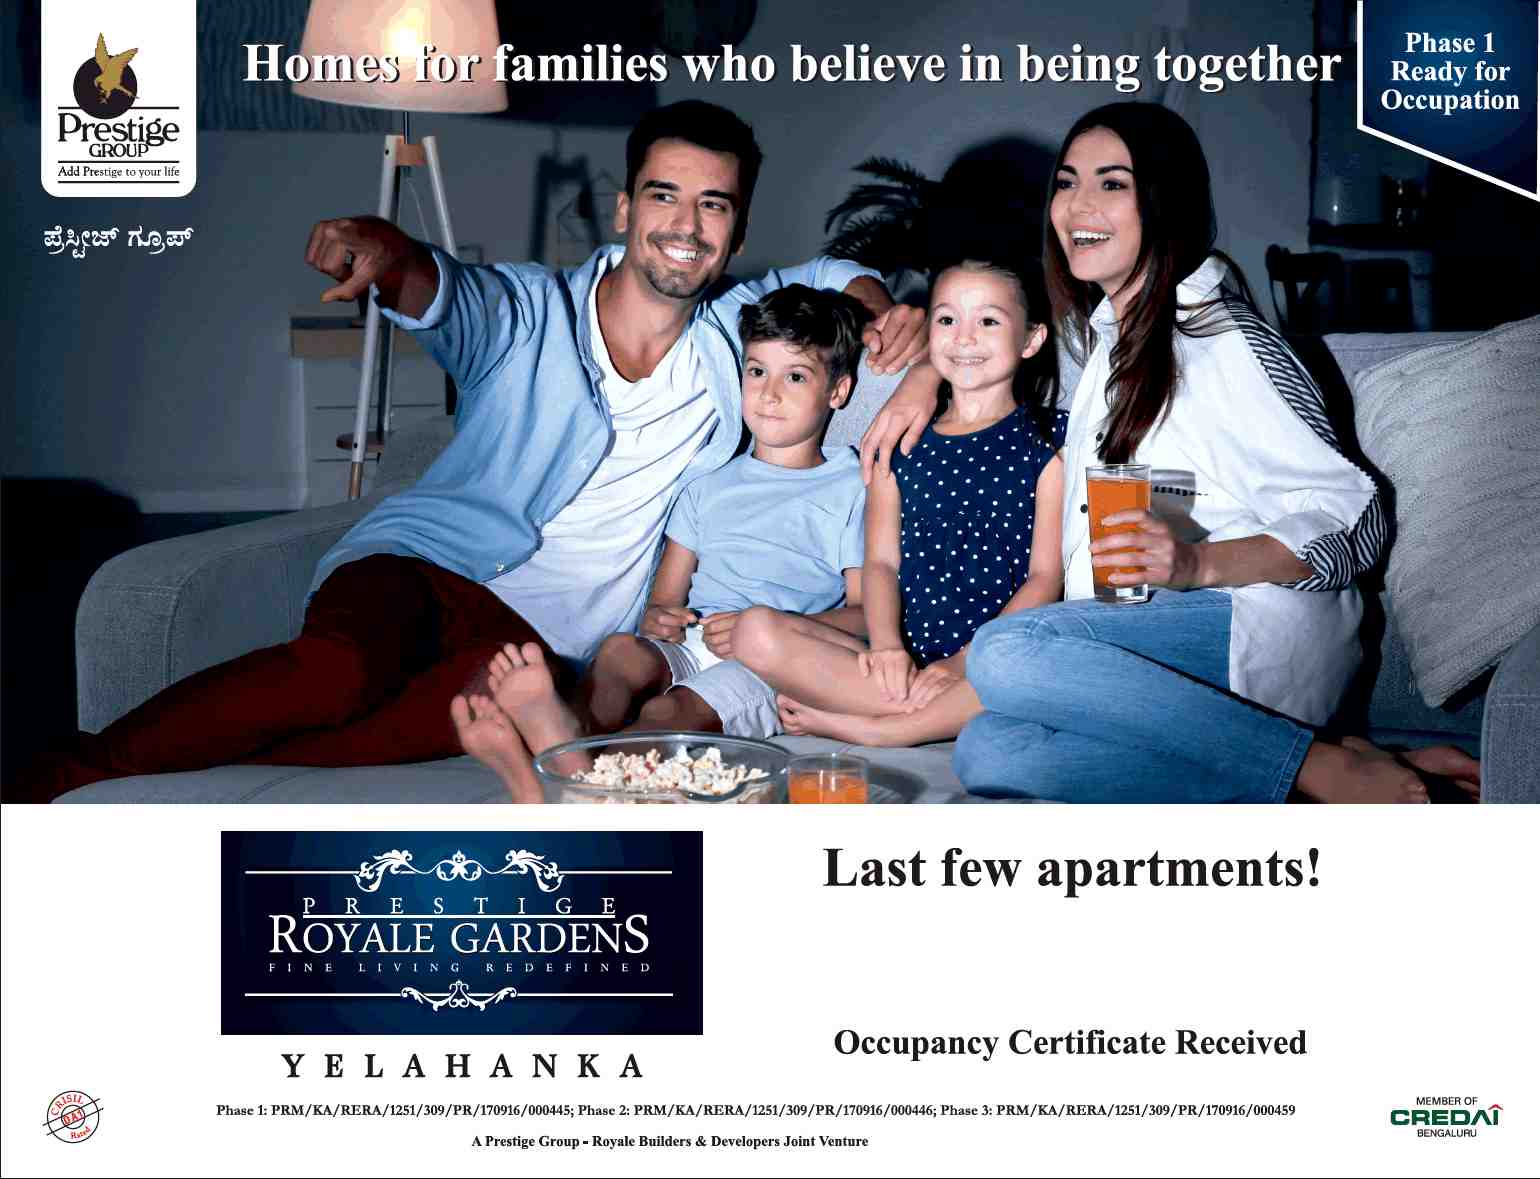 Occupancy Certificate received for Prestige Royale Gardens in Bangalore Update